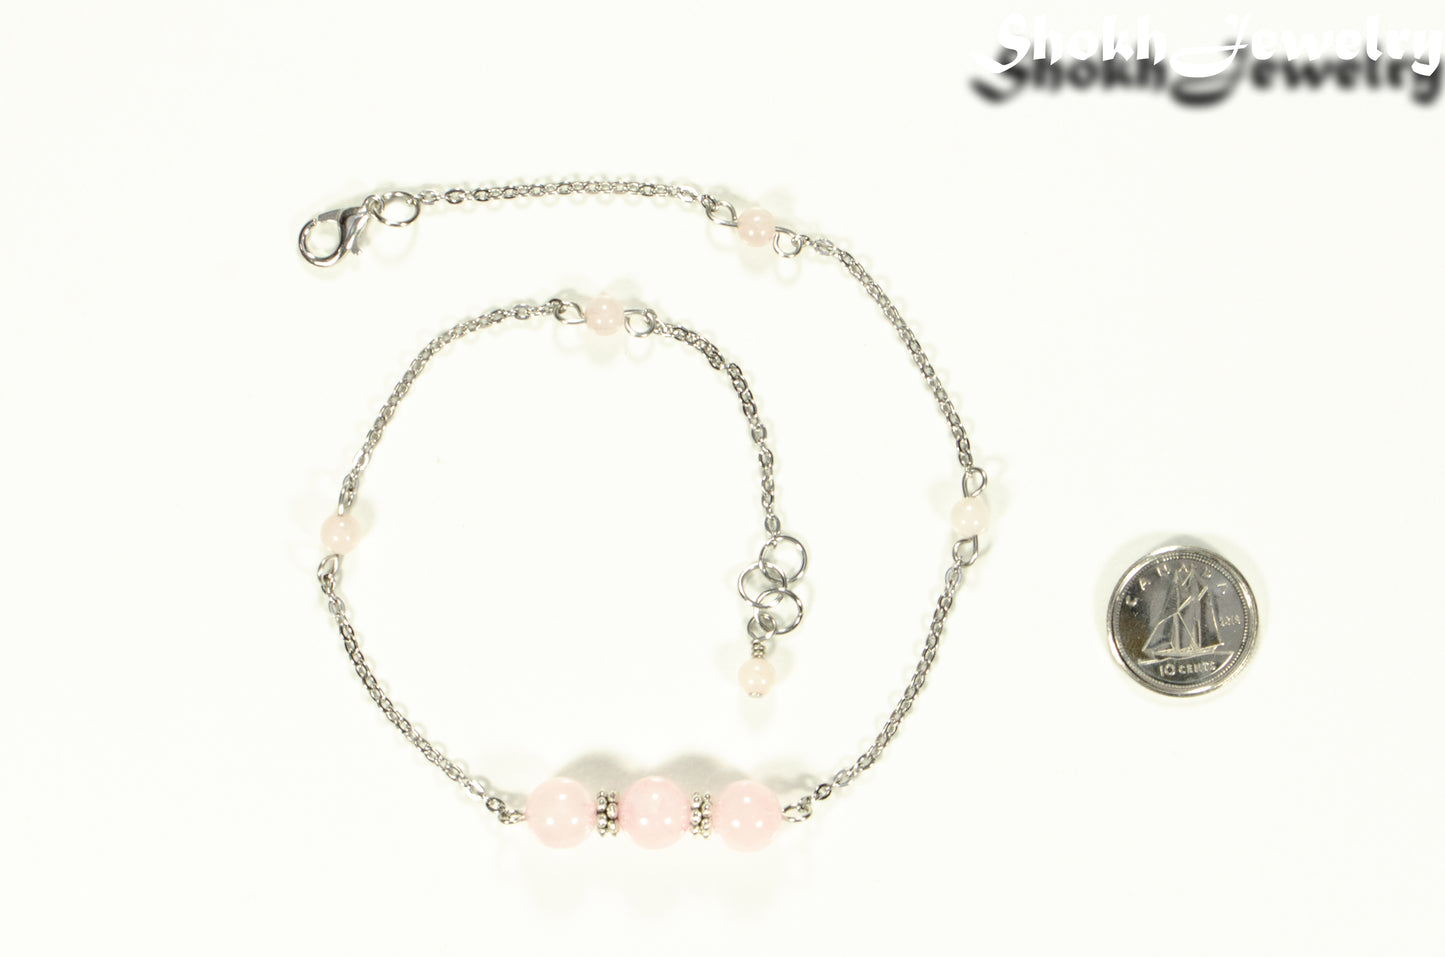 Natural Rose Quartz and Chain Choker Necklace beside a dime.